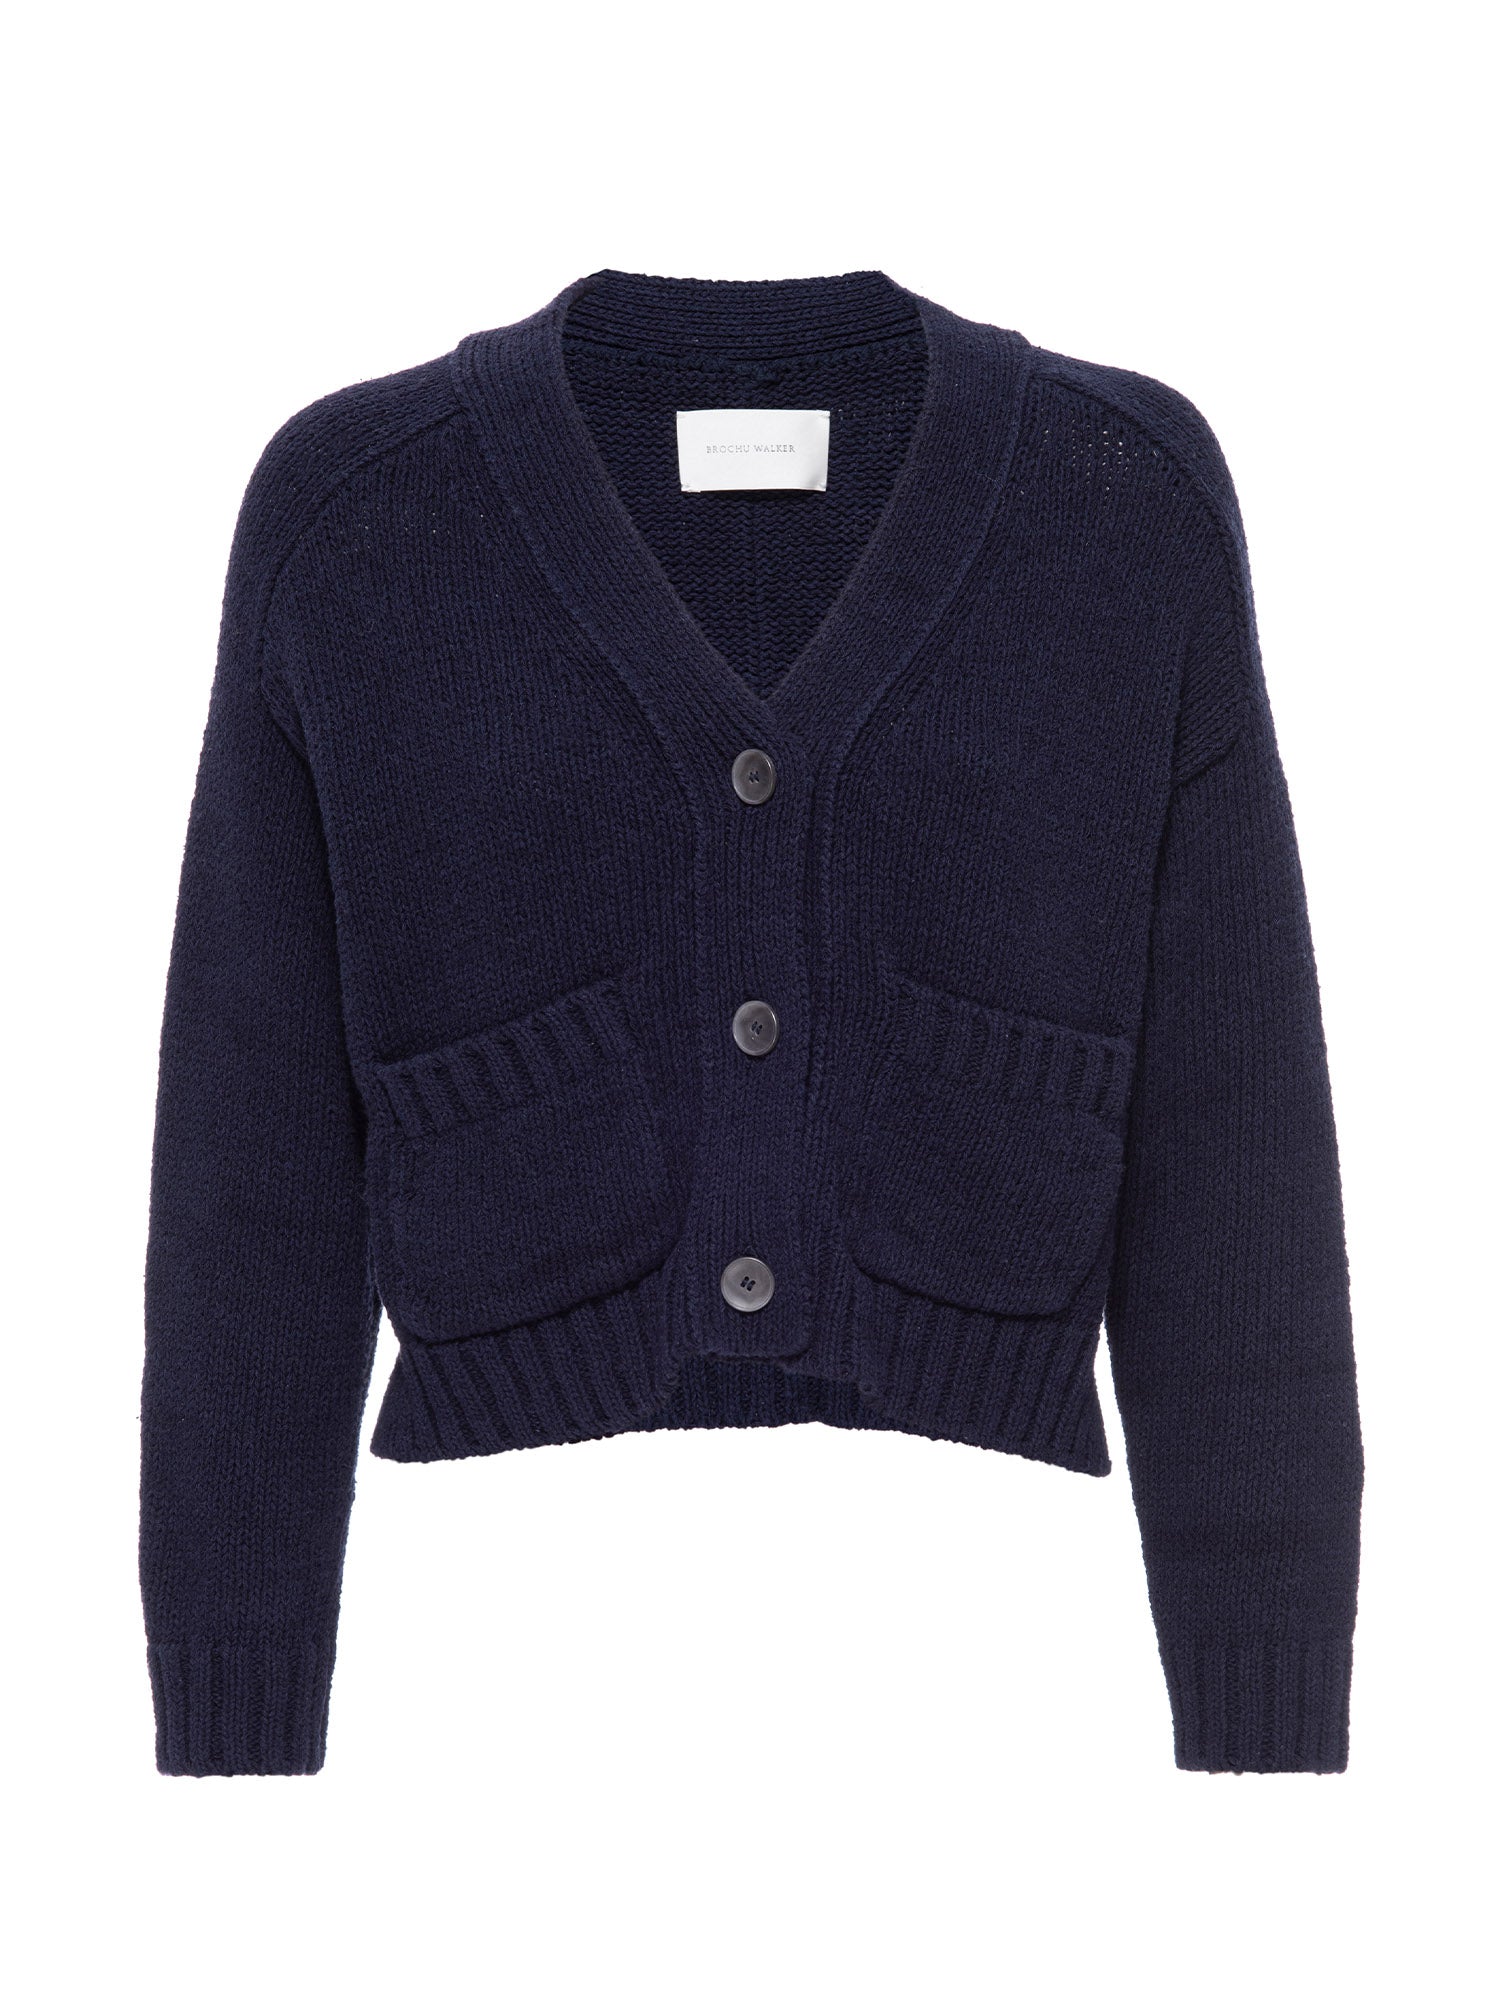 Cropped navy linen cotton cardigan sweater flat view